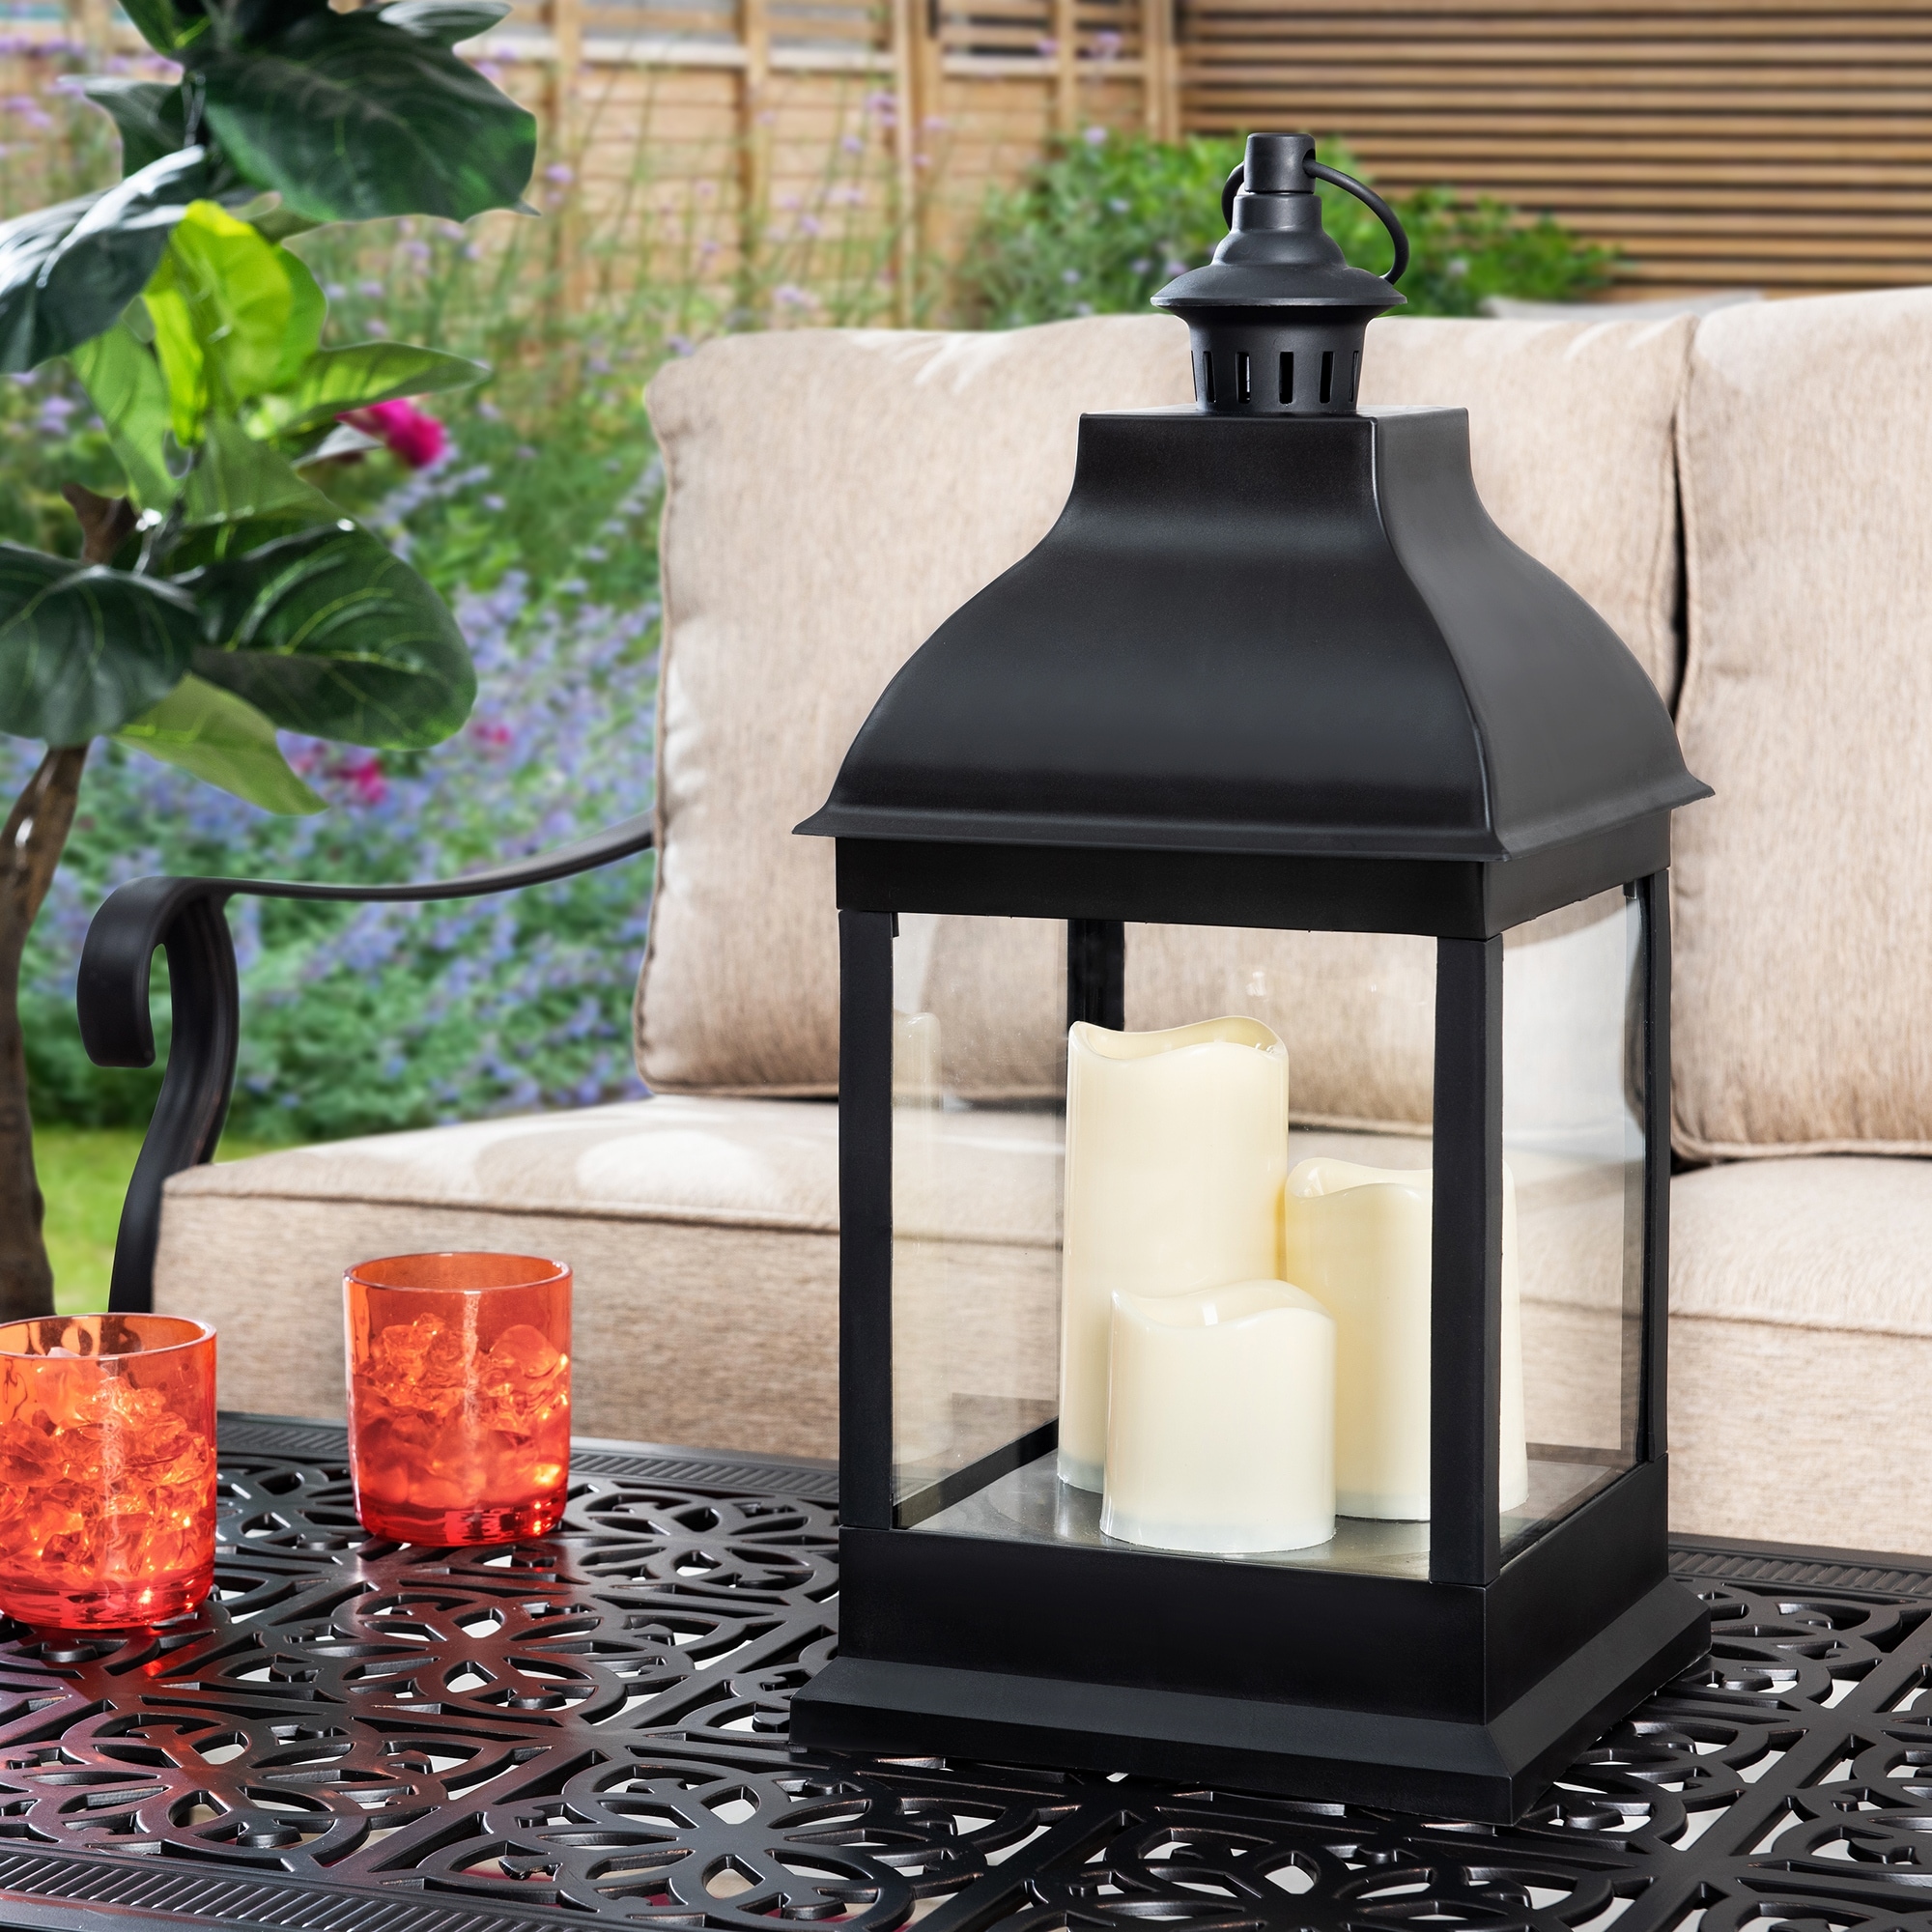 https://ak1.ostkcdn.com/images/products/is/images/direct/b0cee148ebf2a4156e16ef429ae8e2335671da8b/Sunjoy-20%22-LED-Battery-Powered-Lantern%2C-Outdoor-Patio-Decorative-Light%2C-Waterproof-Hanging-Lantern-with-3-Flameless-Candles.jpg